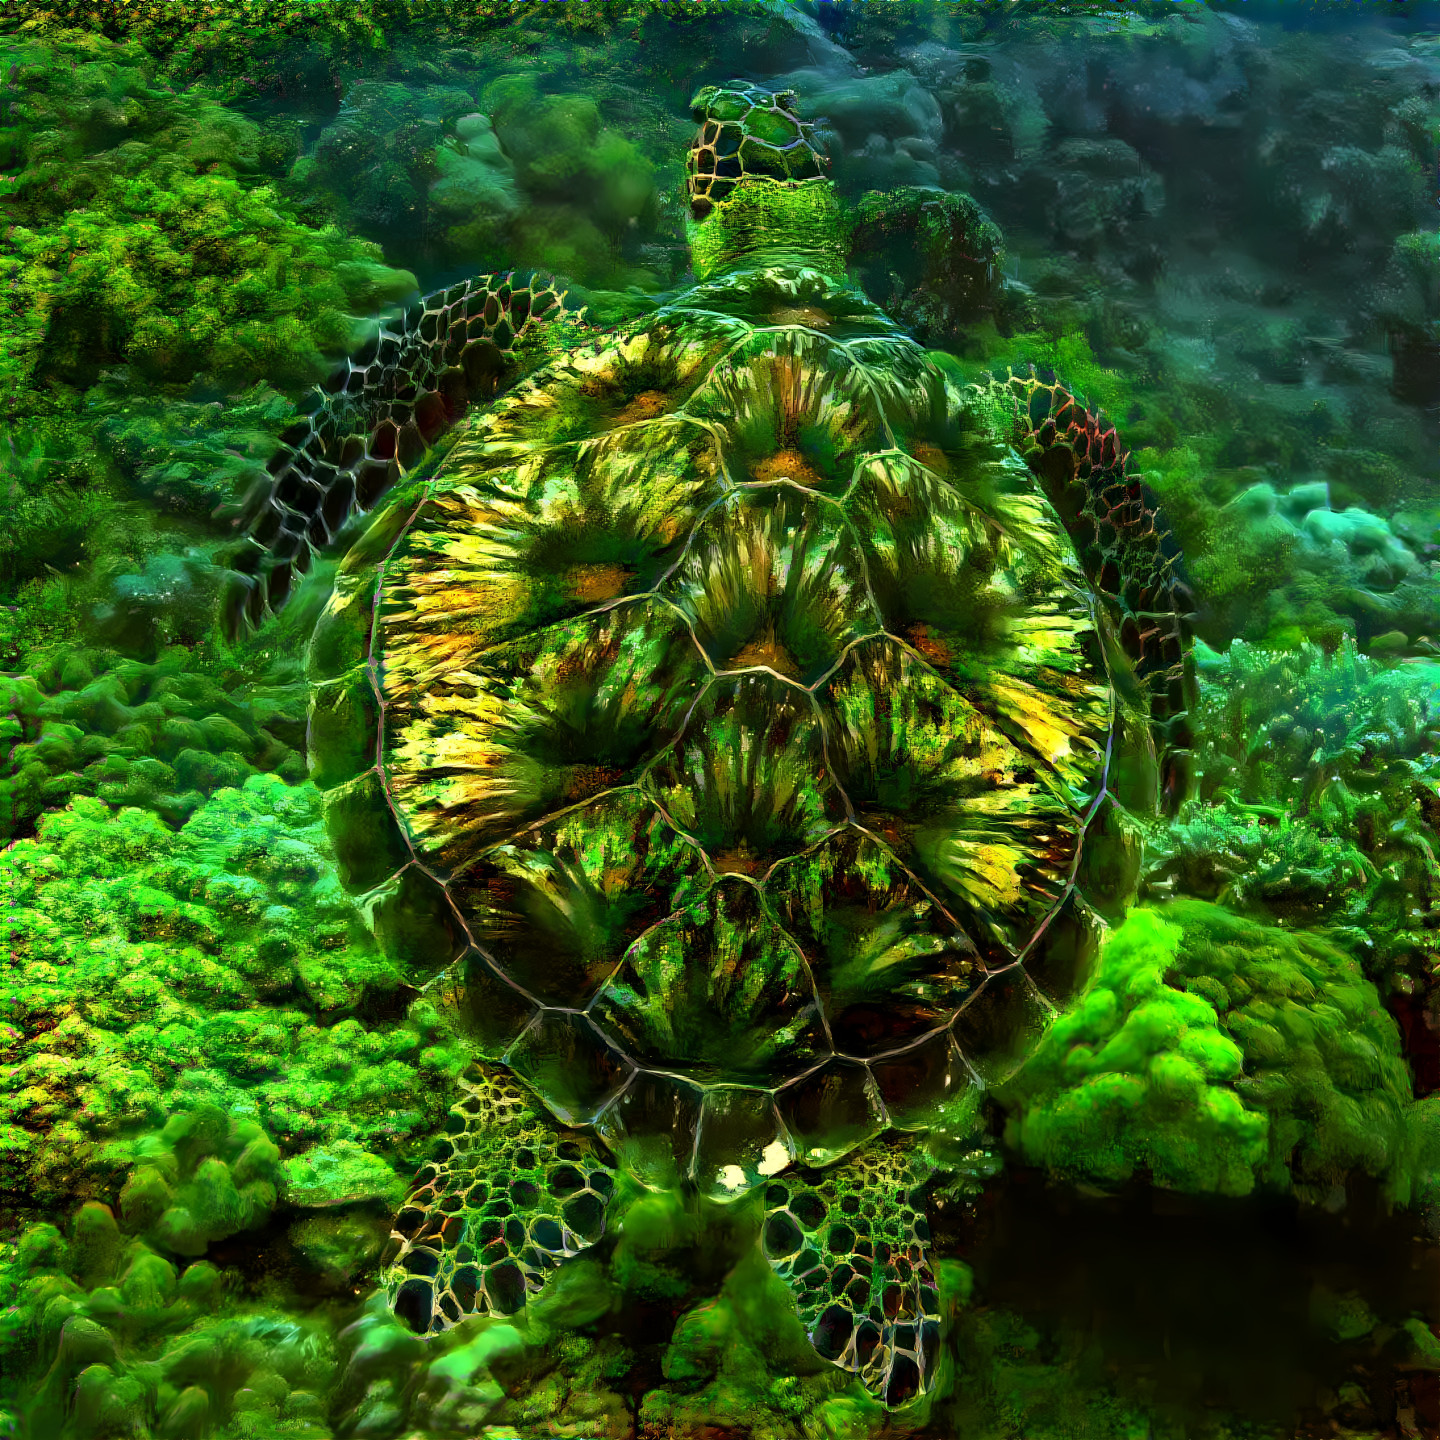 Green sea turtle with patterned shell